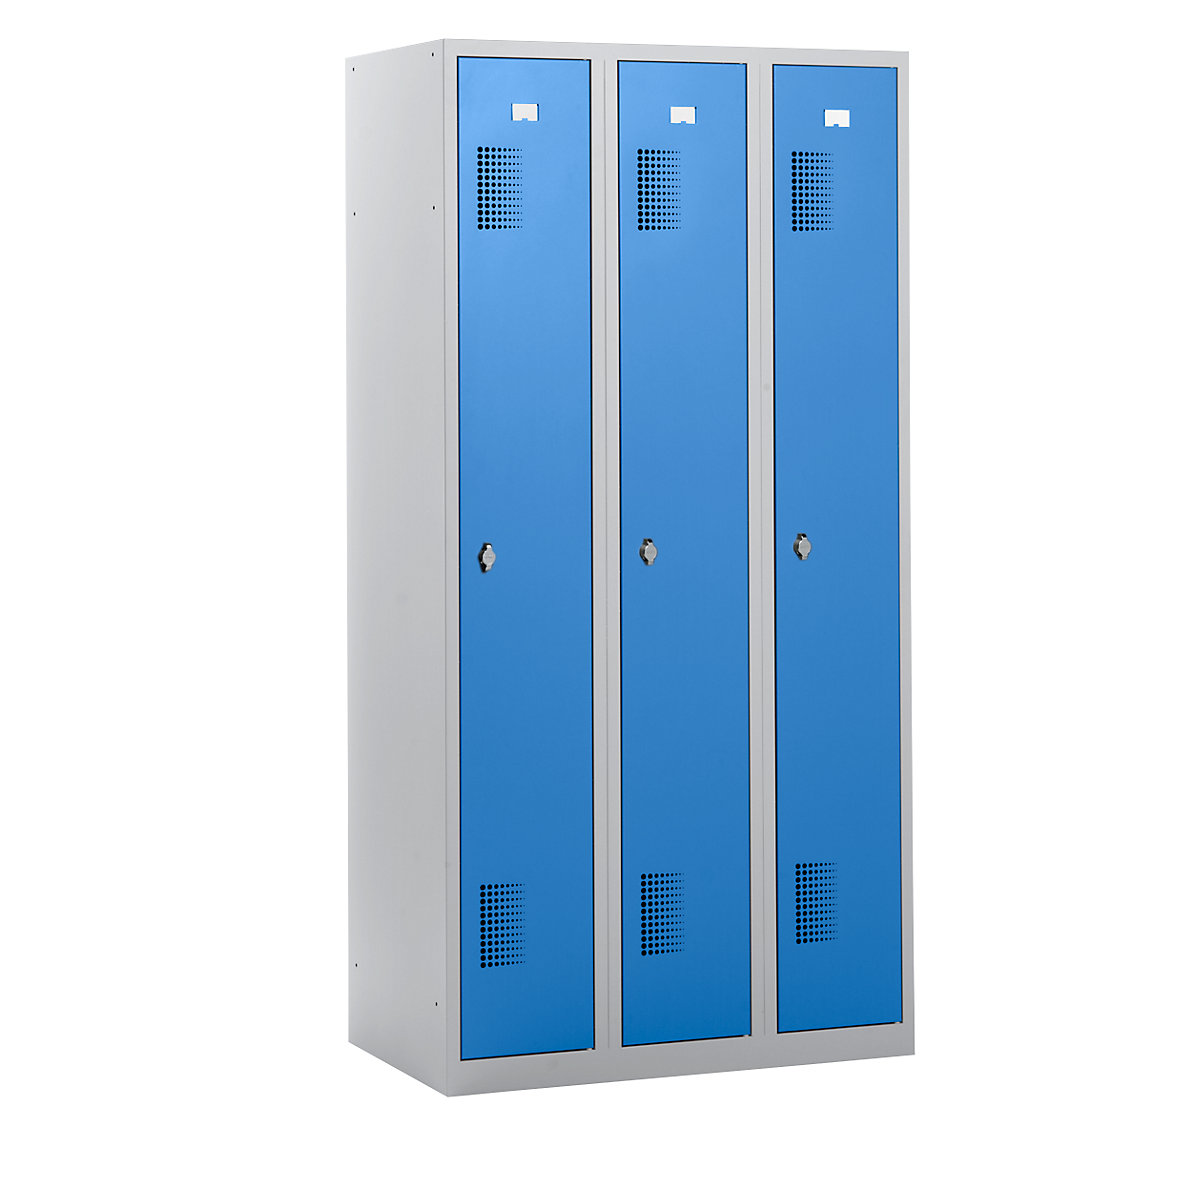 AMSTERDAM cloakroom locker – eurokraft basic, height 1800 mm, width 900 mm, 3 x 298 mm wide compartments, with fittings for padlock, light grey body / light blue doors-4